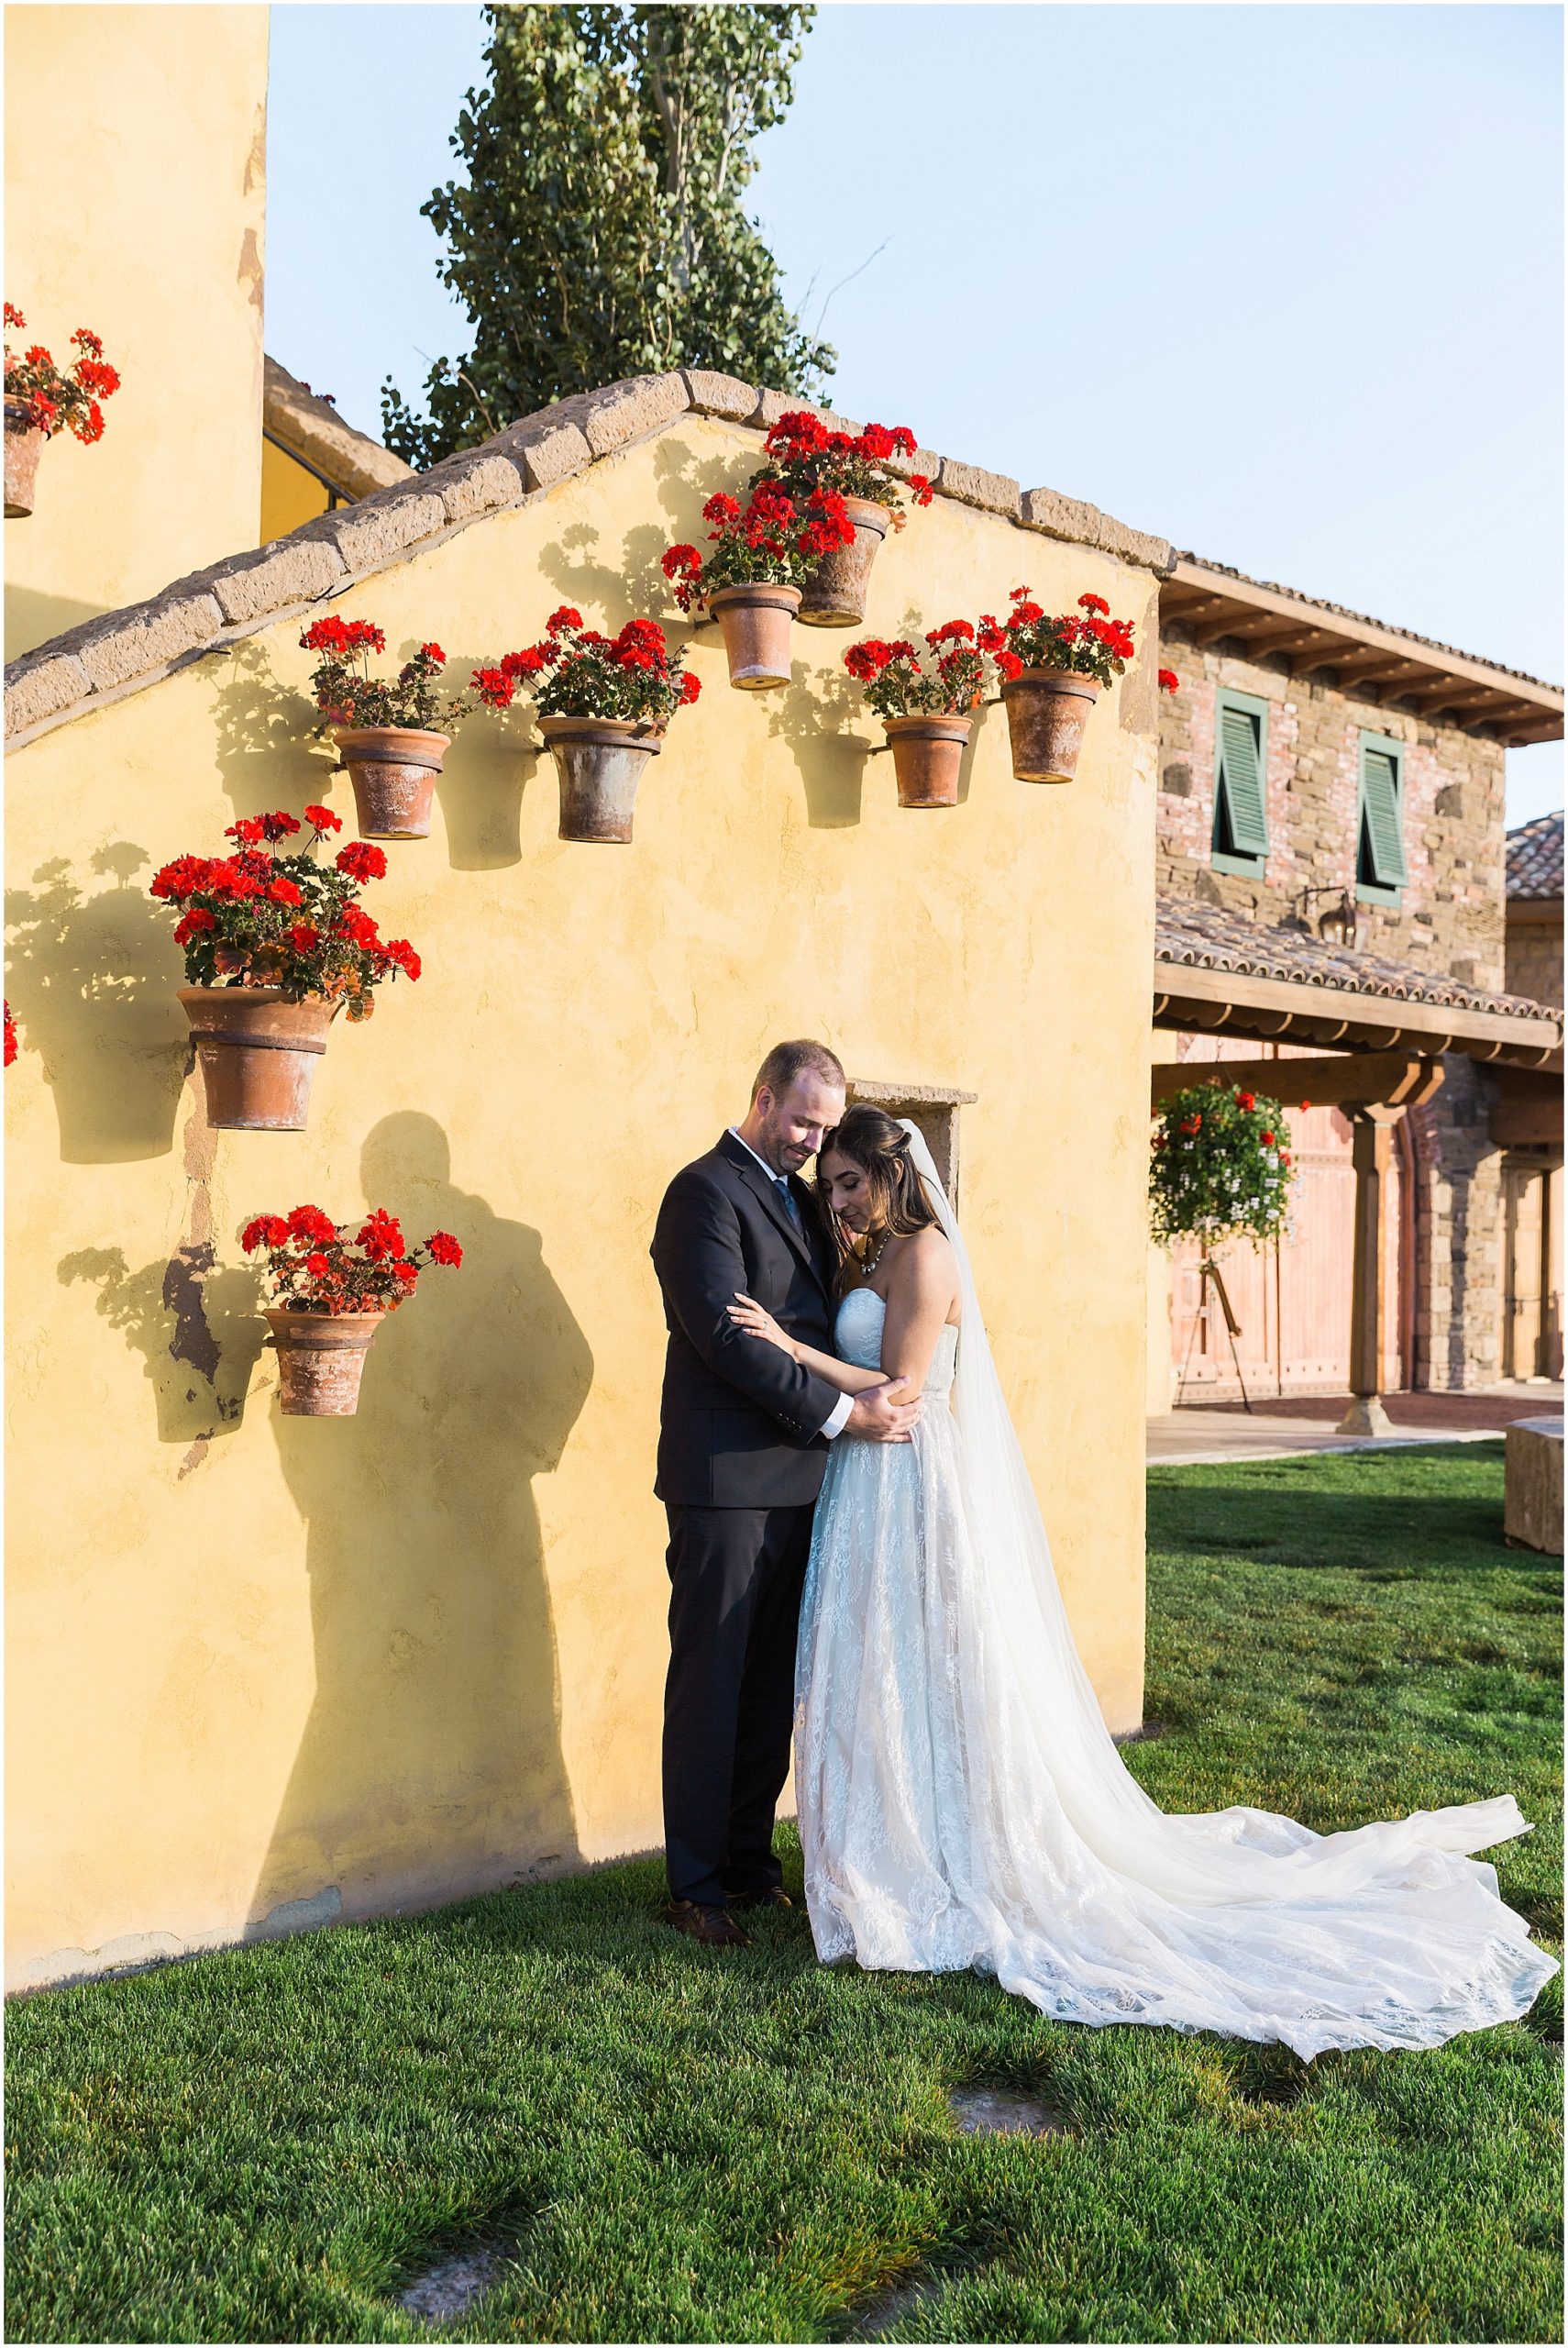 The baskets adorned with red flowers hanging from the yellow walls are such a pretty pop of color for this wedding couple's portraits at their Ranch at the Canyons fall wedding. Photographed by Bend Oregon wedding photographer Erica Swantek Photography. 